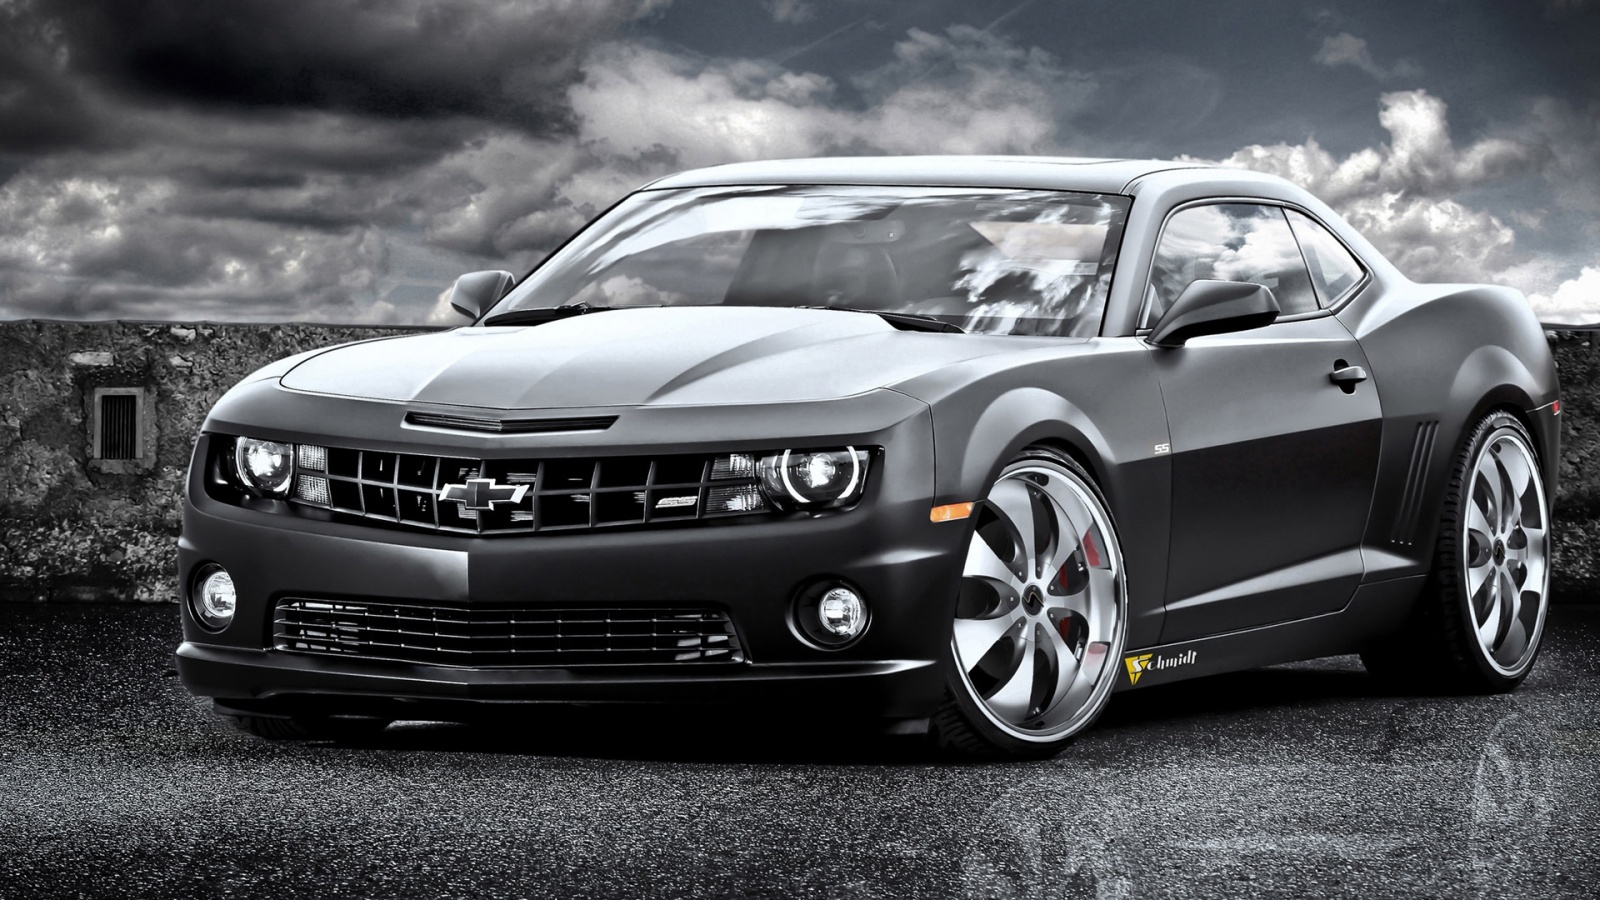 Chevrolet Camaro SS Wallpapers HD Wallpapers 1600x900